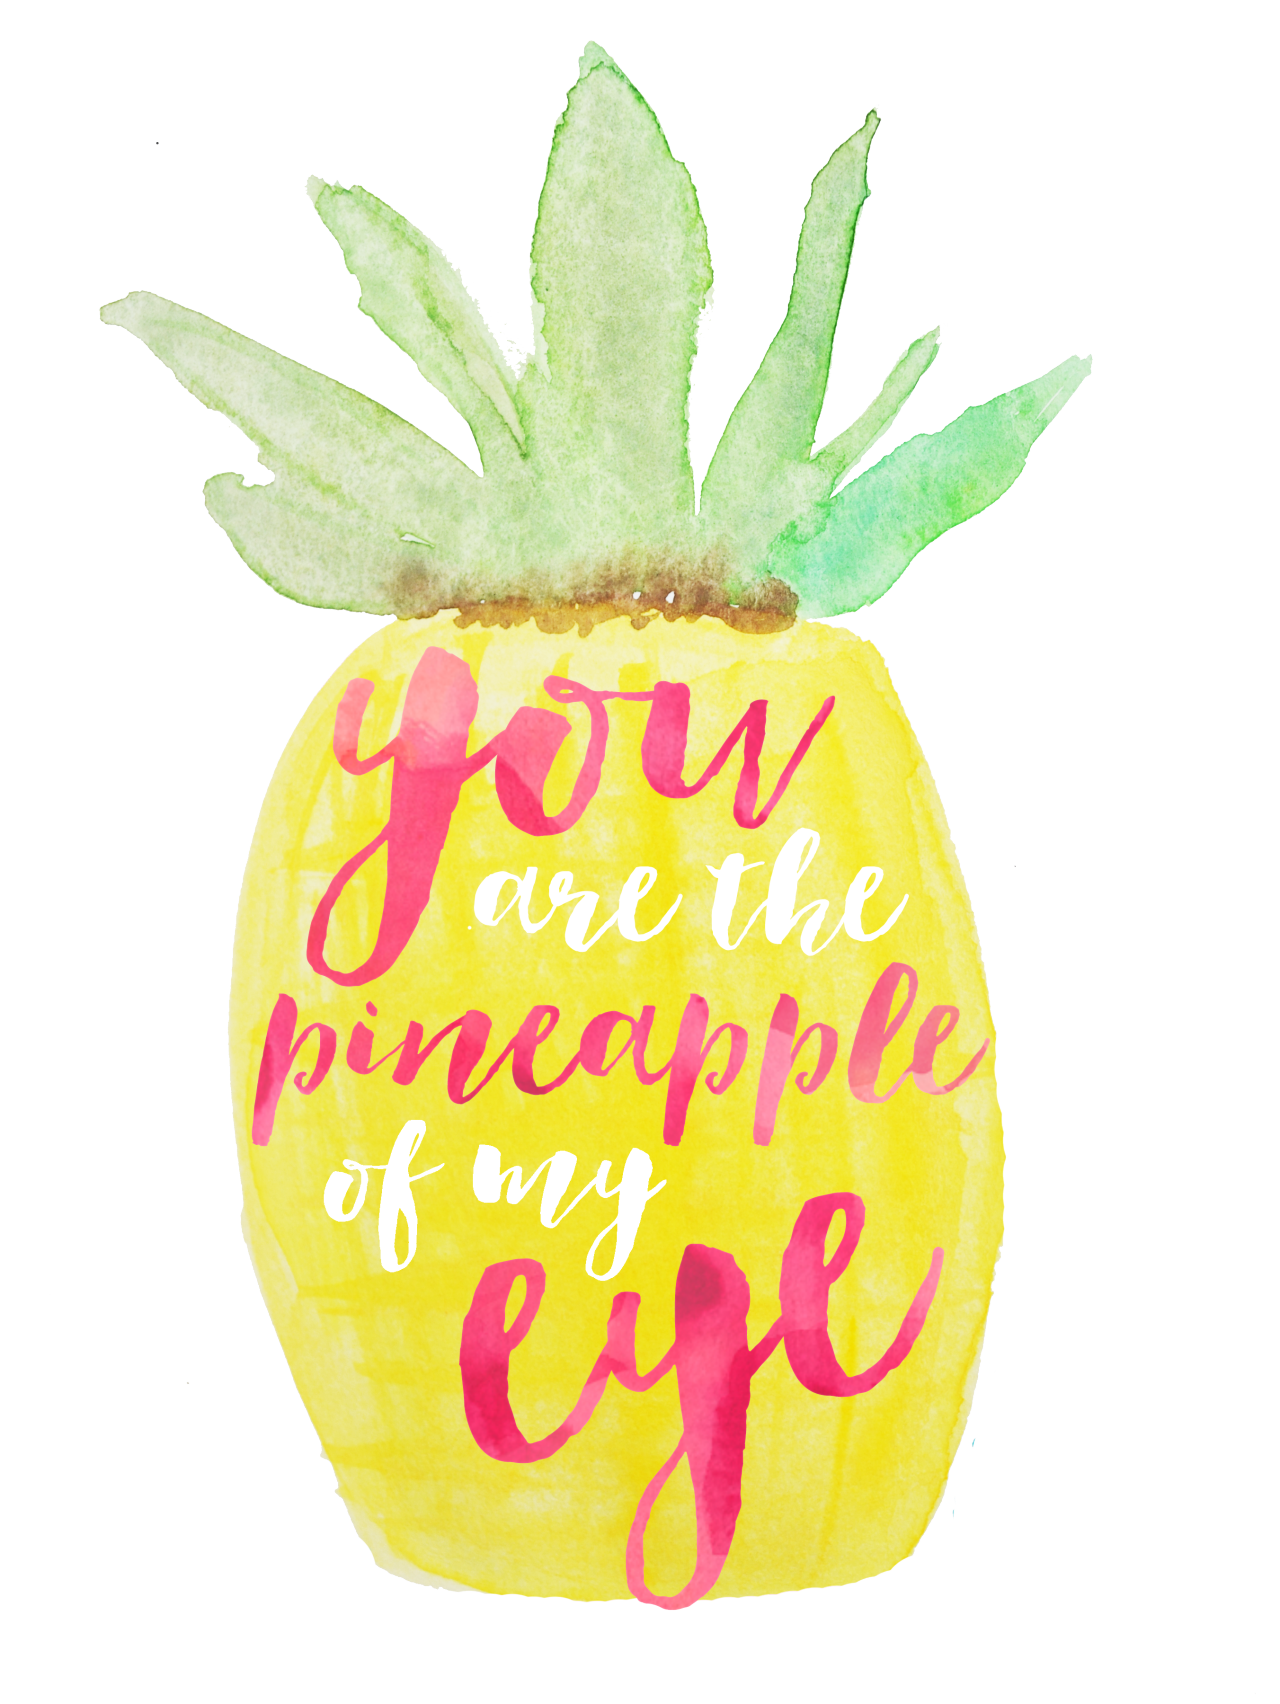 You are the pineapple of my eye. Wonderful words, Cute quotes